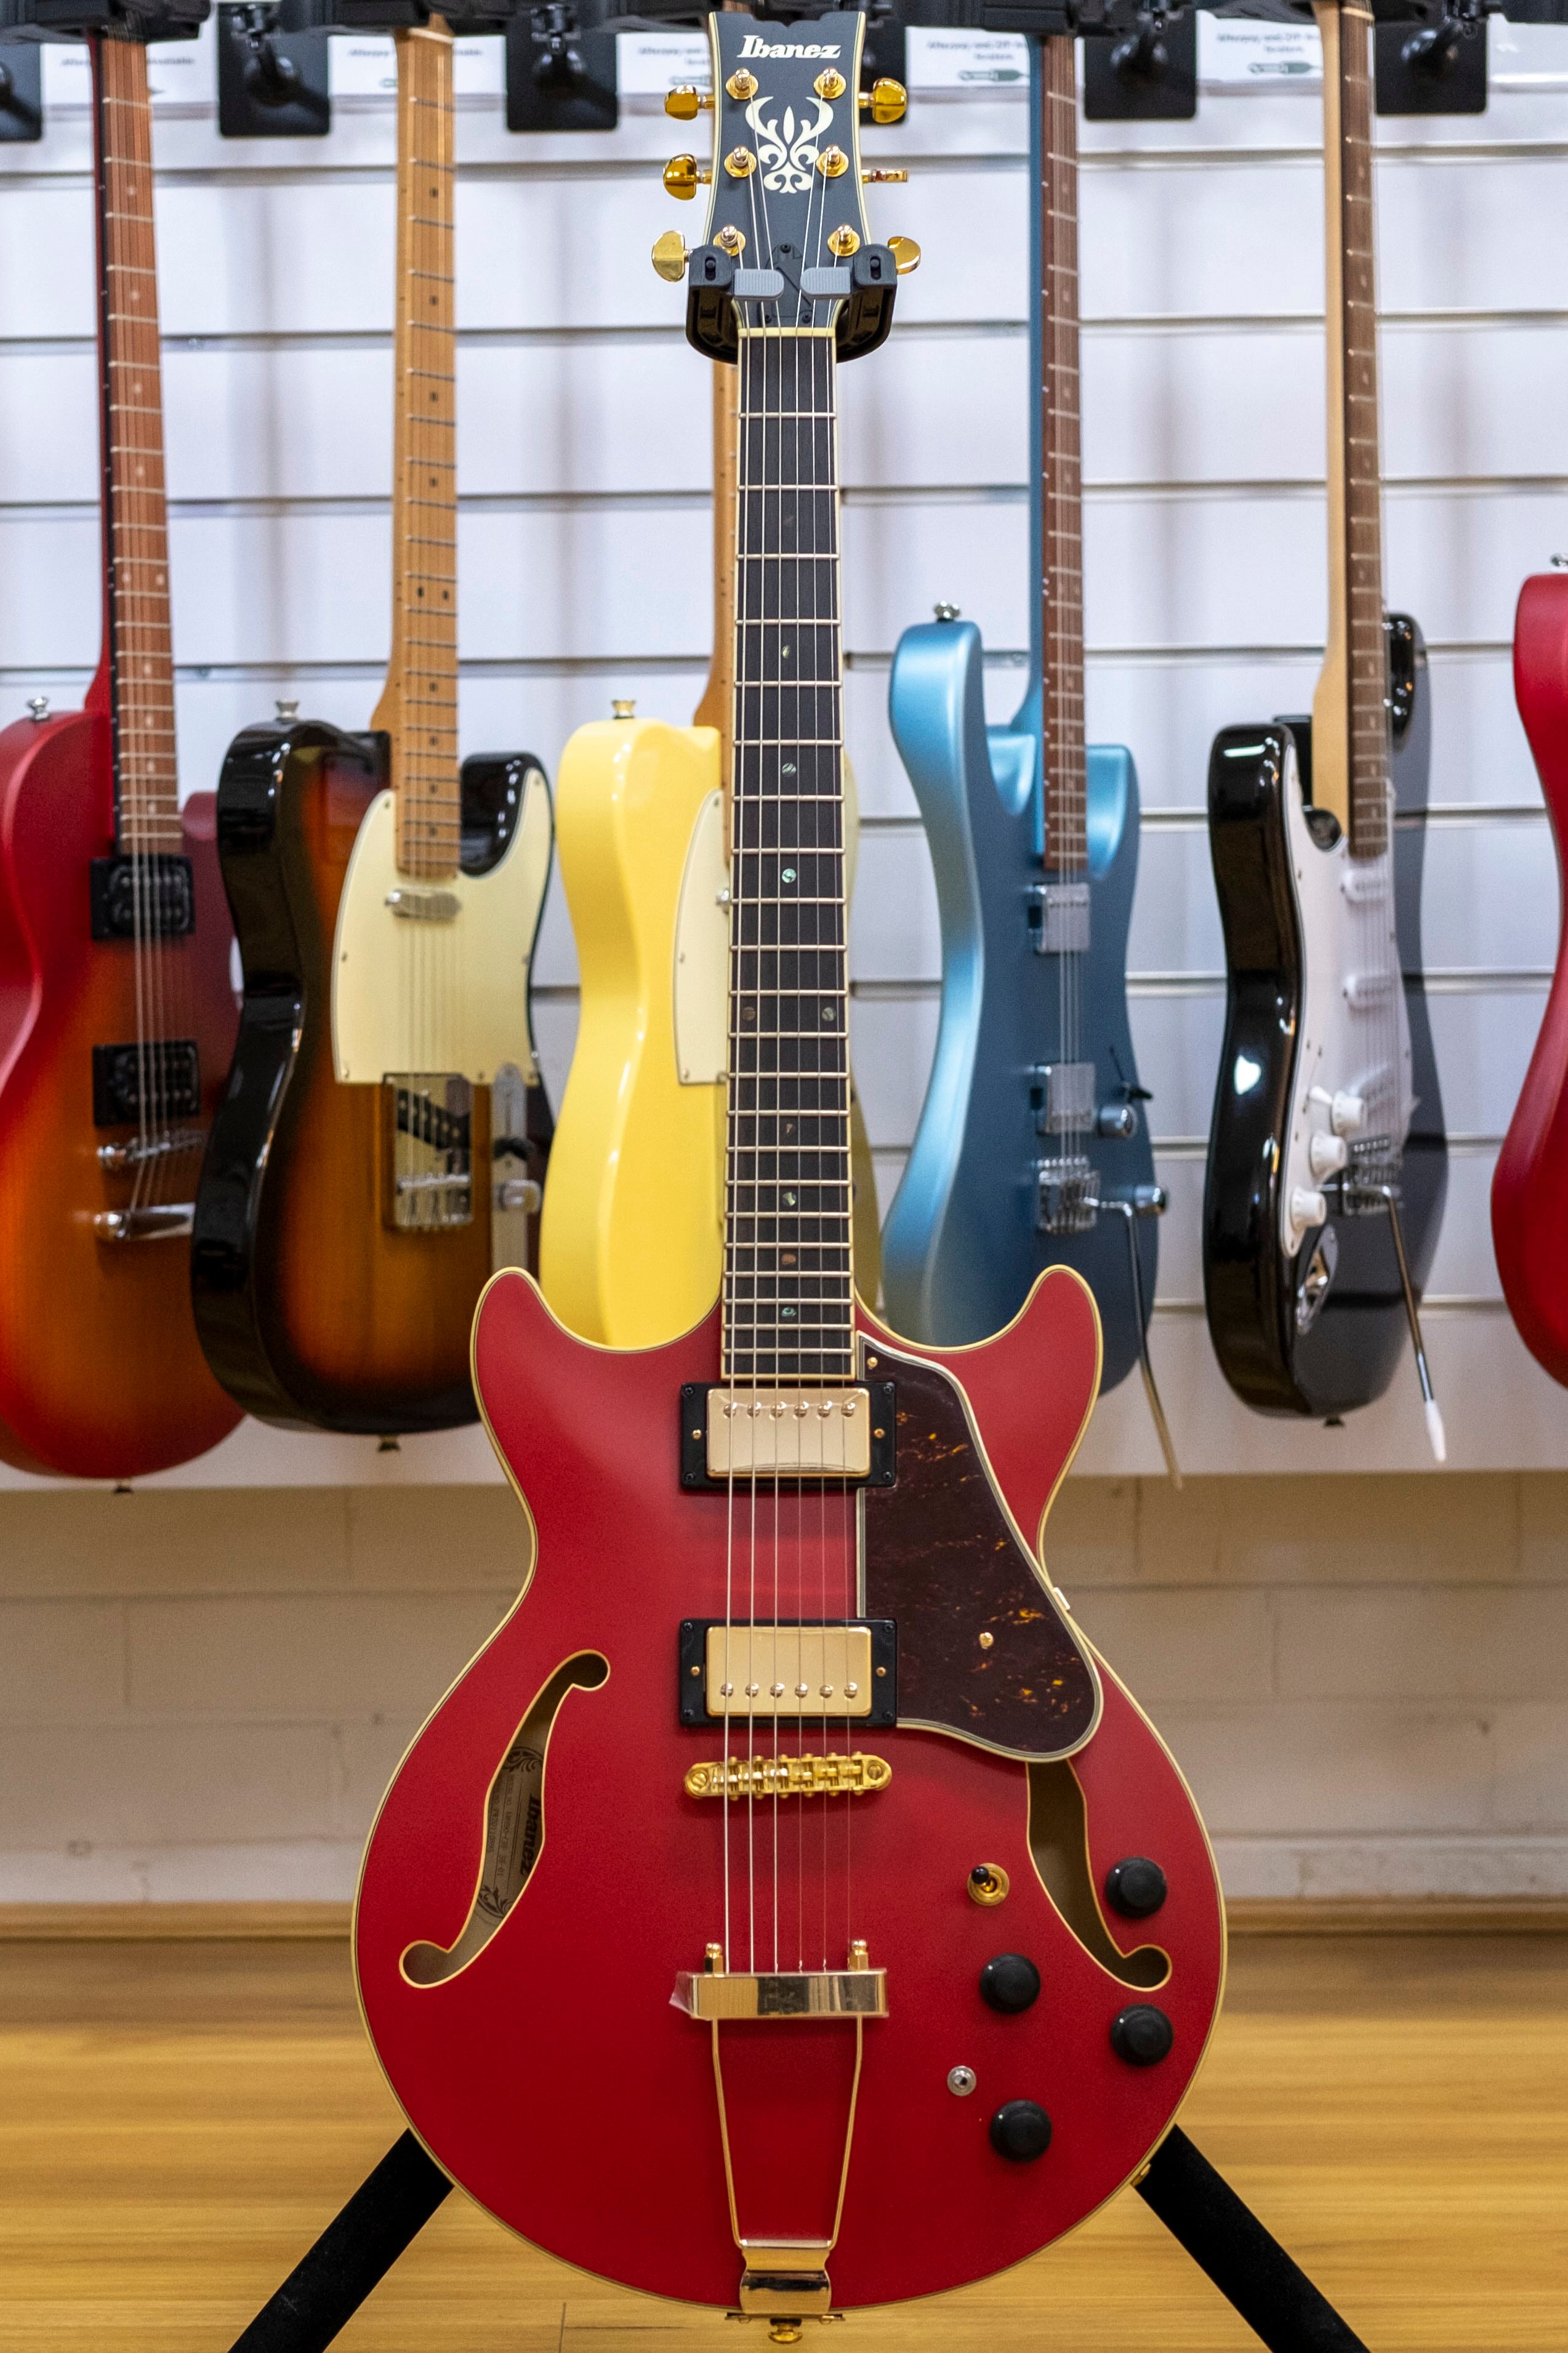 Ibanez AMH90 Artcore Expressionist Semi-Hollow Electric Guitar (Cherry Red Flat)